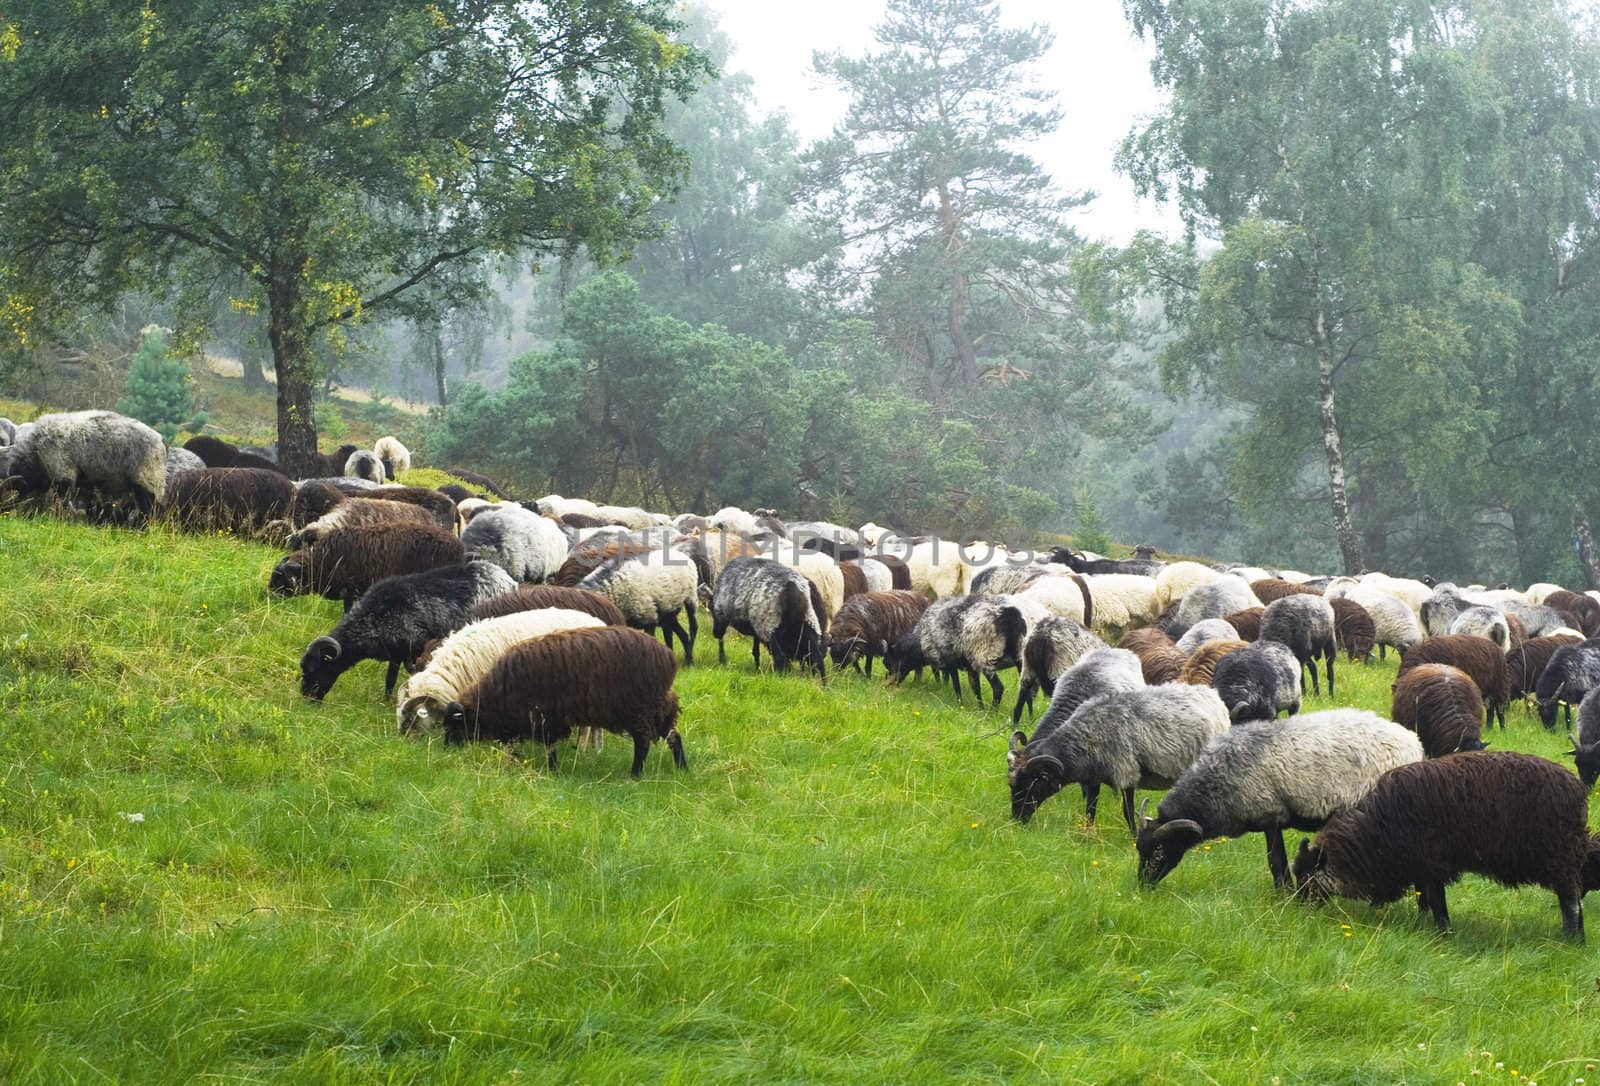 Flock of sheep grazing on a mountain on a misty morning.